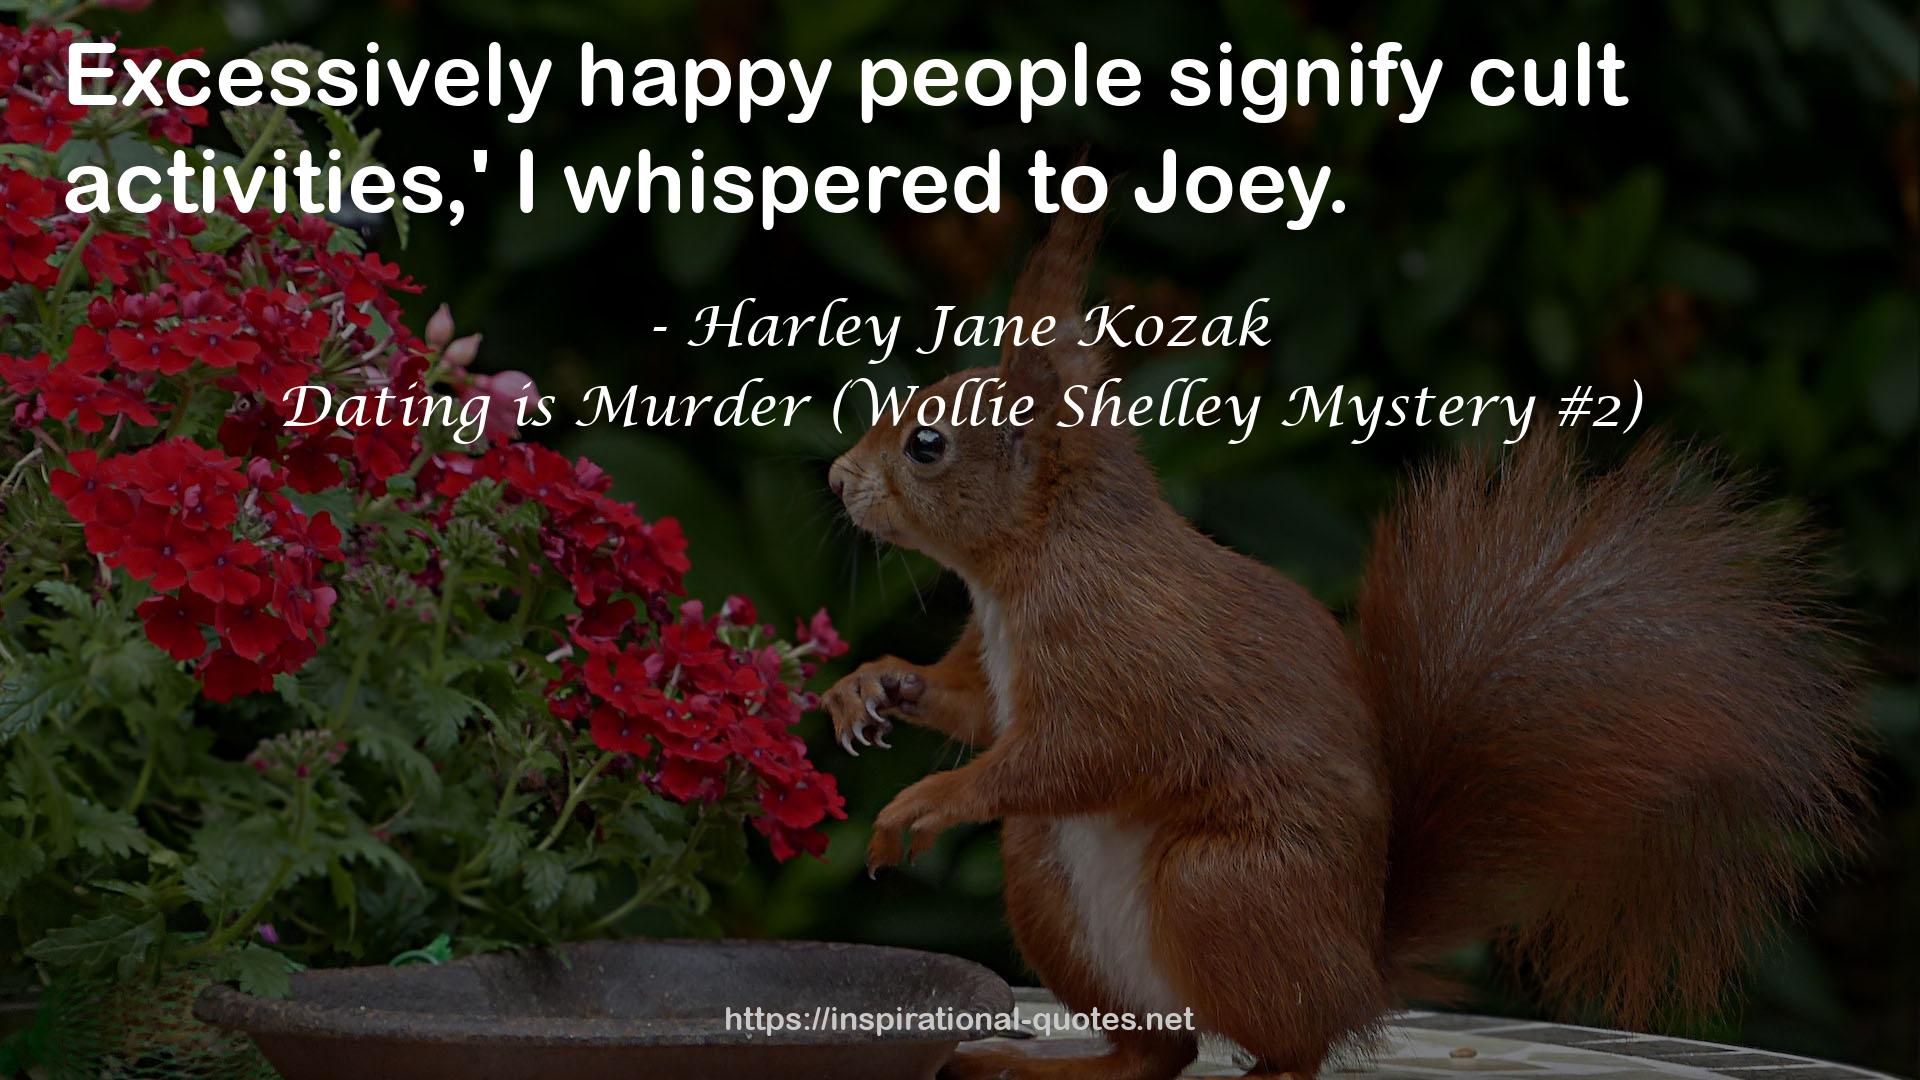 Dating is Murder (Wollie Shelley Mystery #2) QUOTES